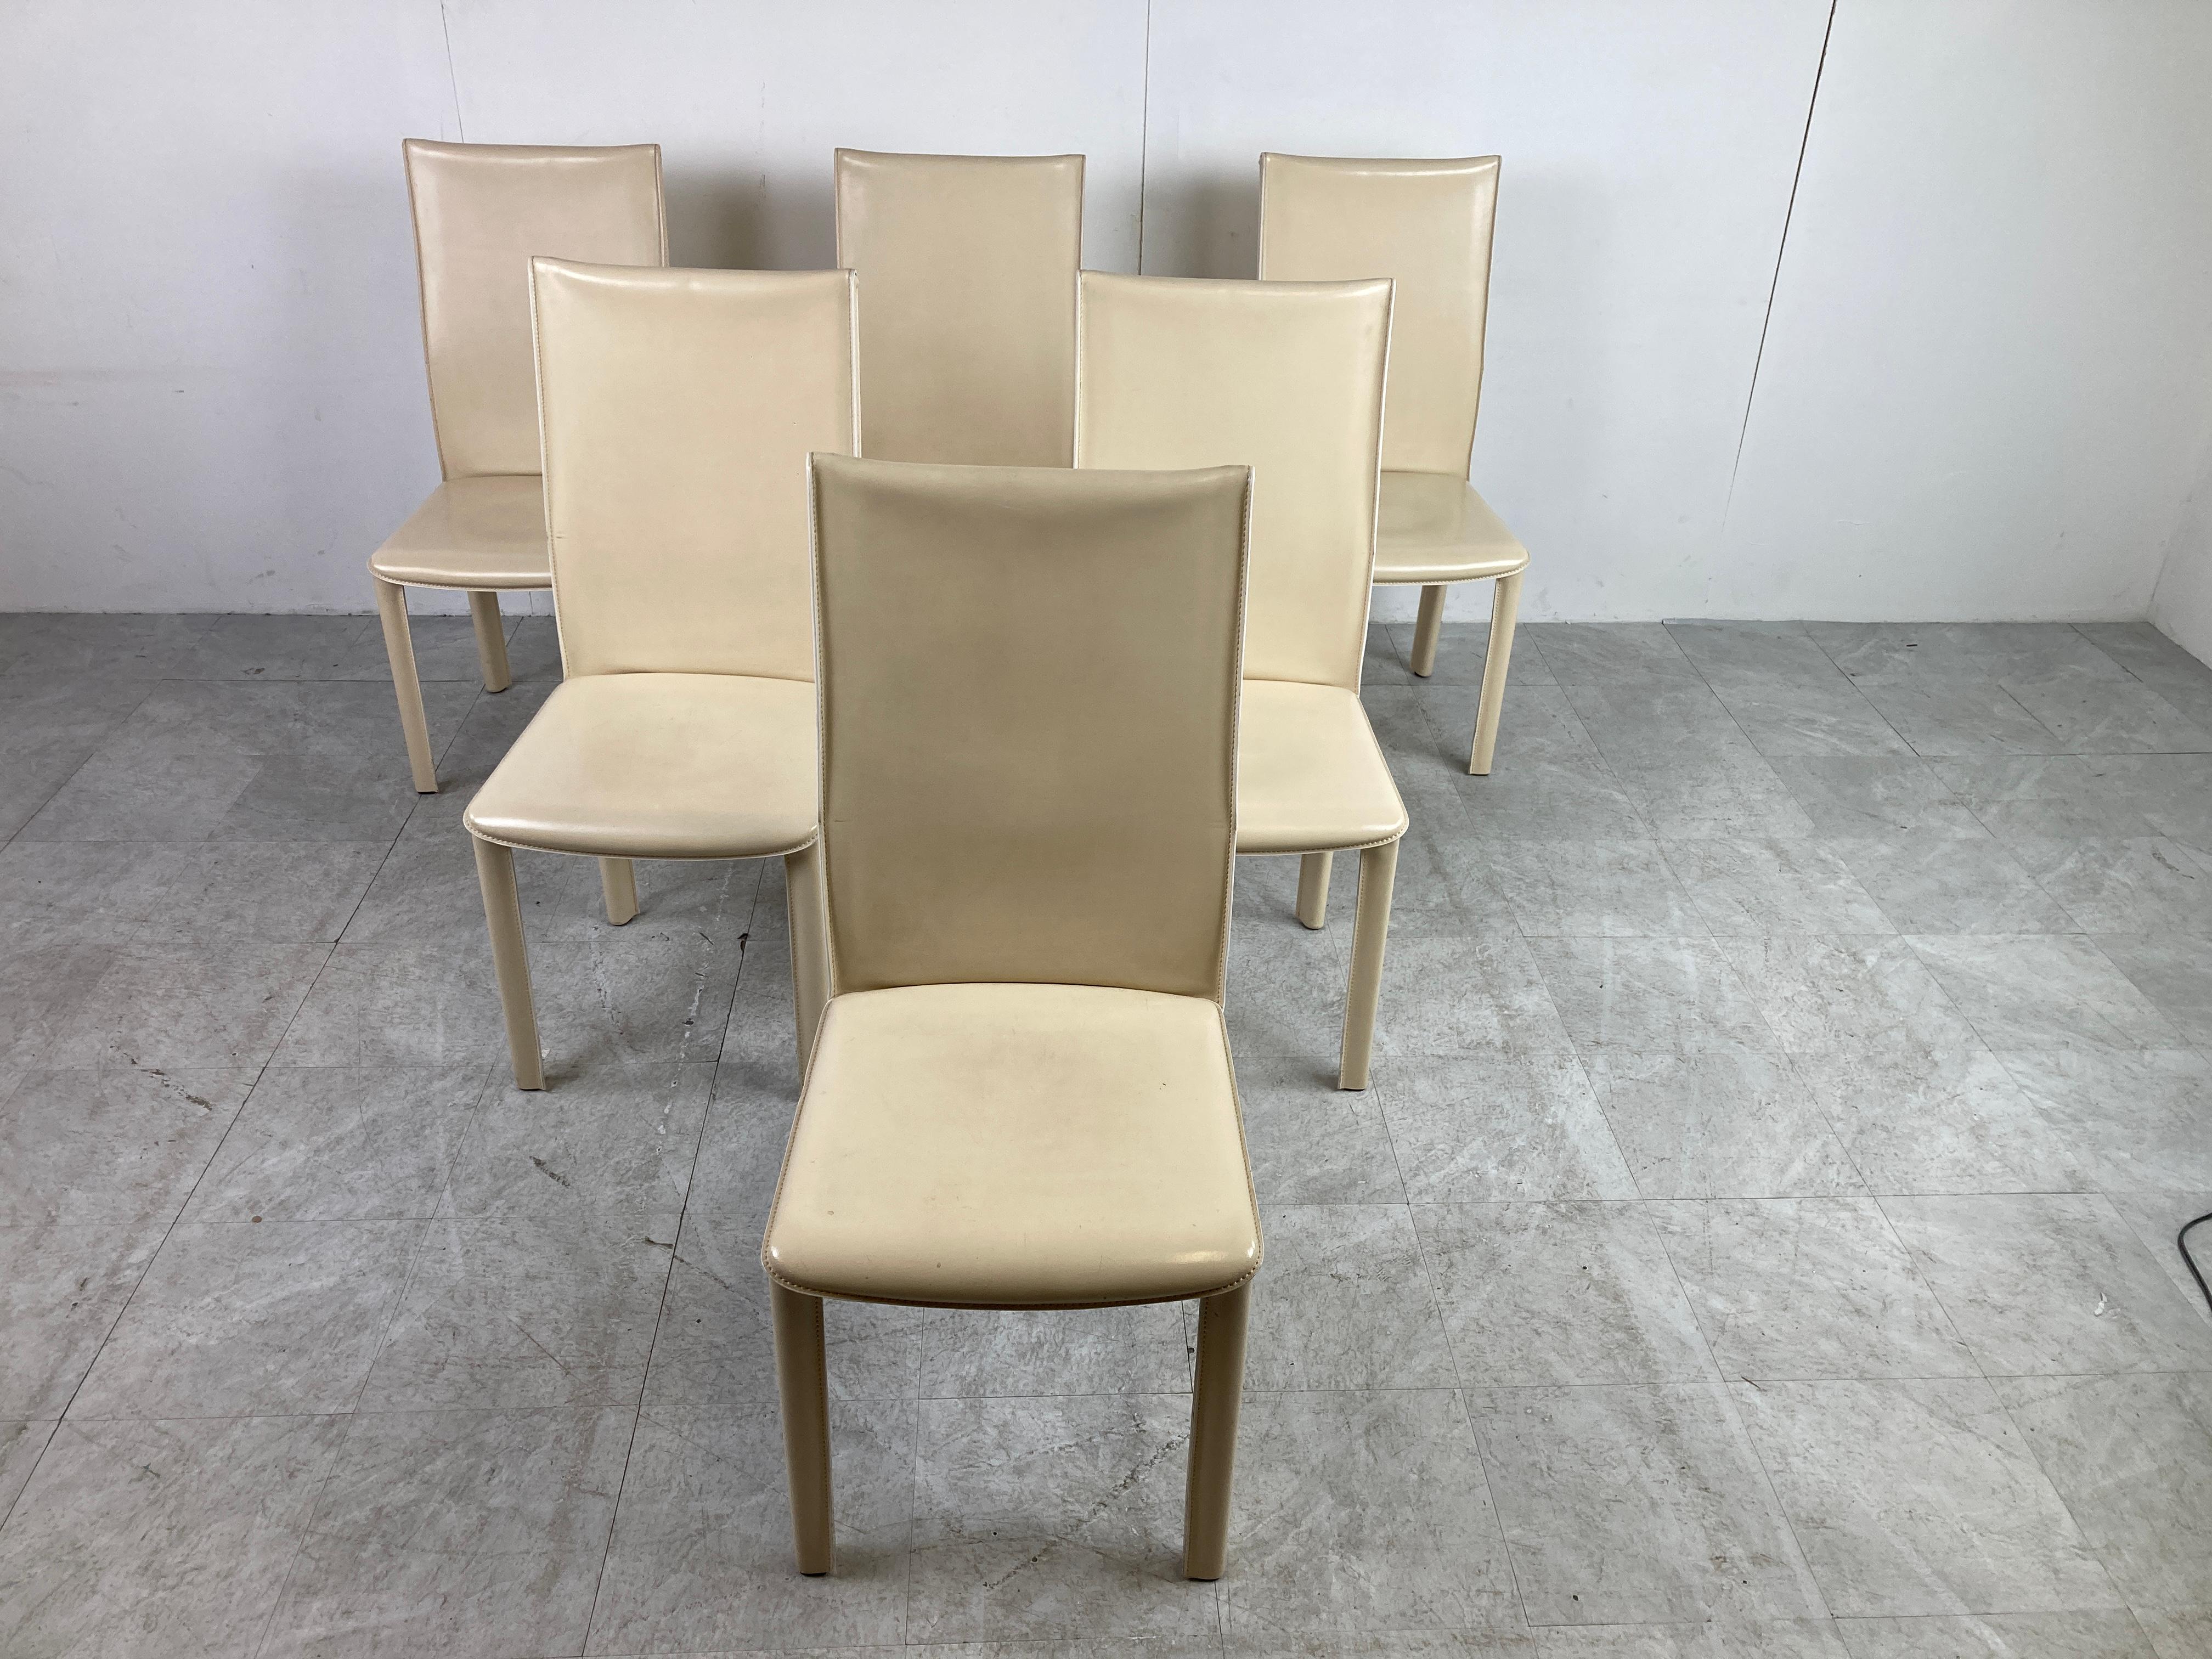 Vintage white/cream leather dining chairs by Arper Italy.

High quality and sturdy stiched leather dining chairs with a timeless design. 

These are the model with the higher backrests.

Cool stitched leather detail at the back of the